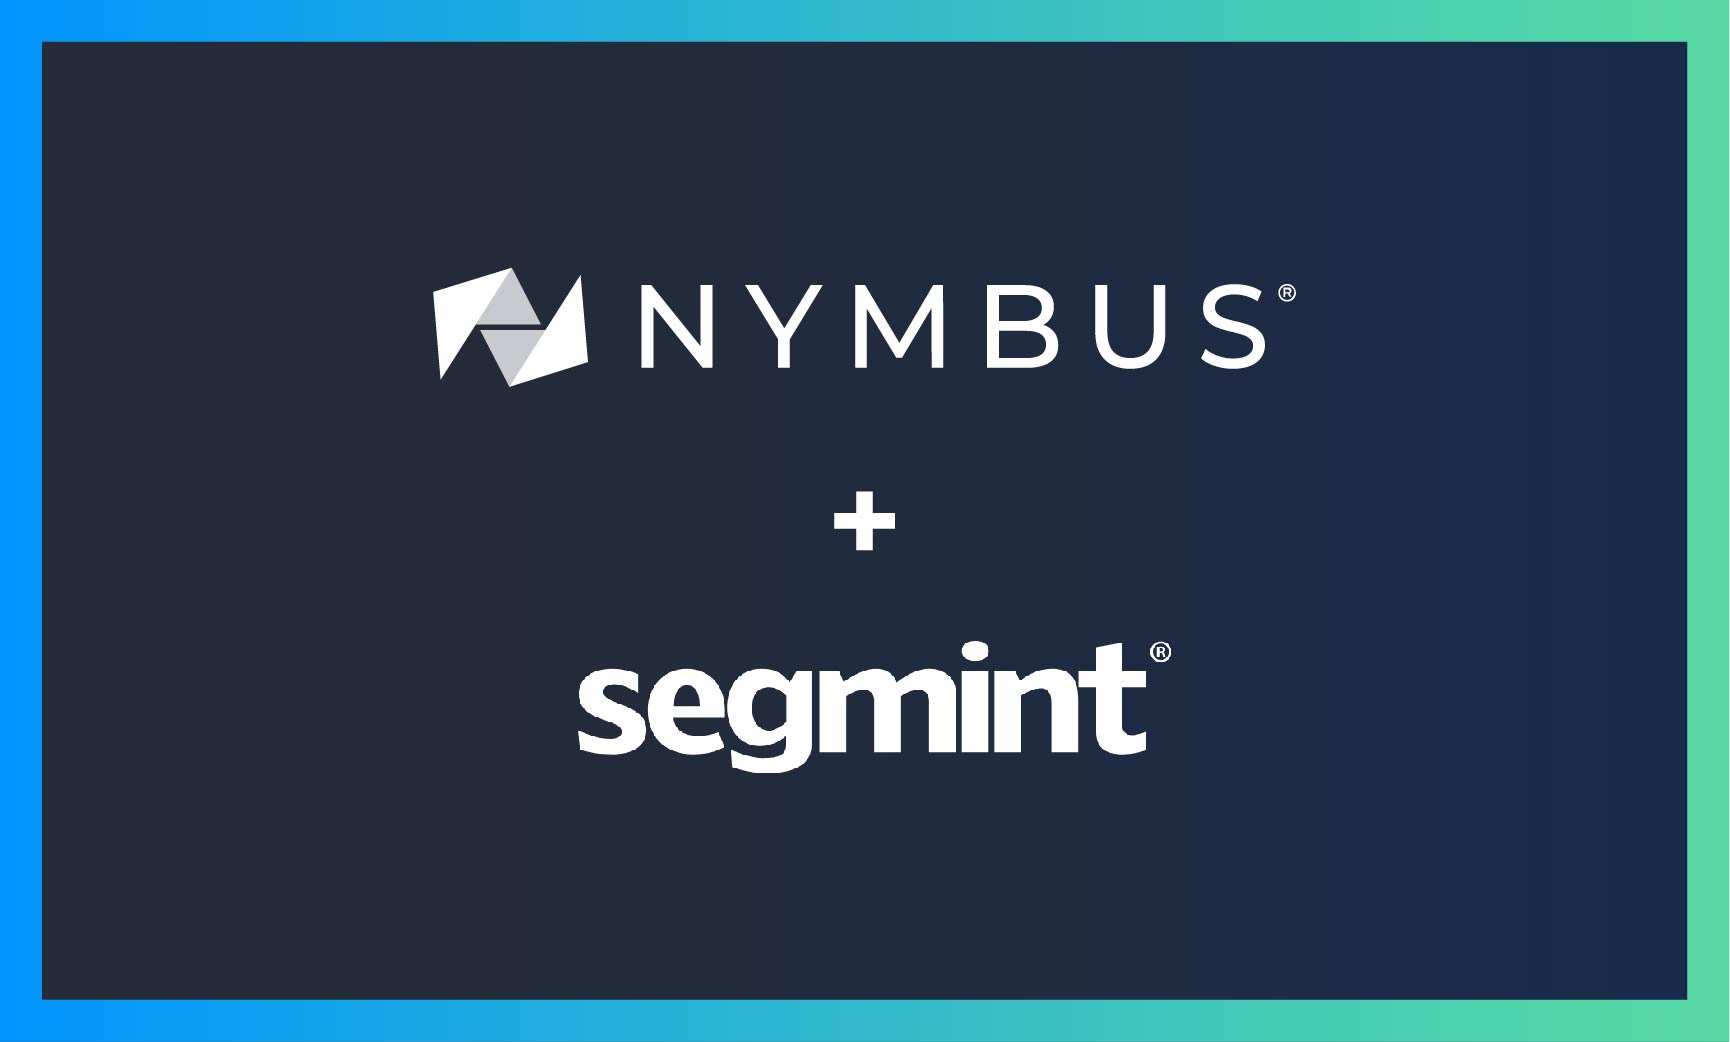 NYMBUS Partners With Segmint to Innovate Payments Data